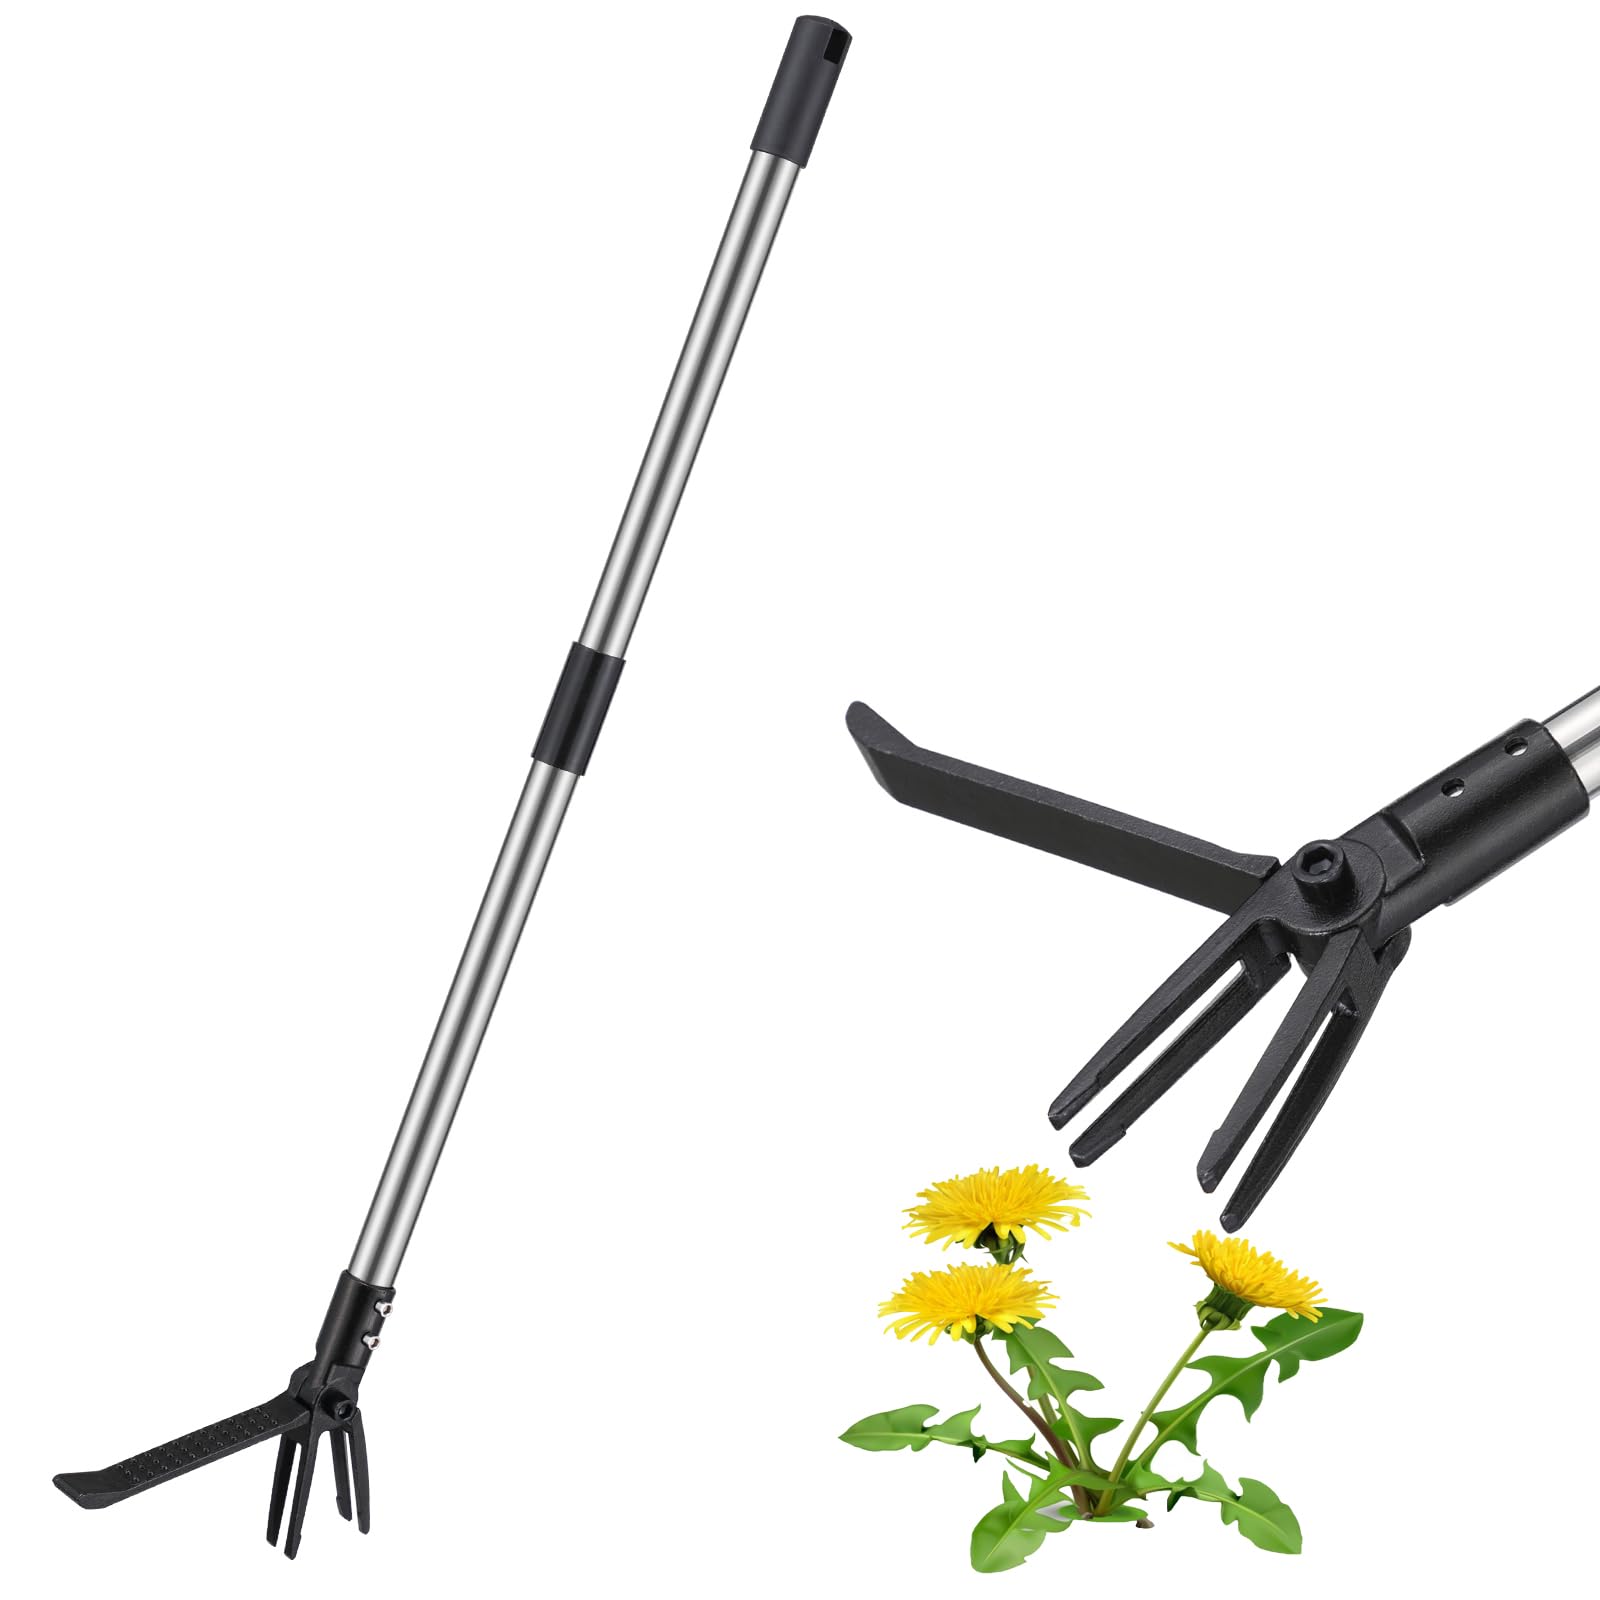 CALCHELE Weed Puller Tool,64 inch Adjustable Stand Up Weed Puller Long Handle,Stand Dandelion Digger Puller, Ergonomic Standing Weeding Puller Tool Weed Picker for Garden Lawn Farmland Yard